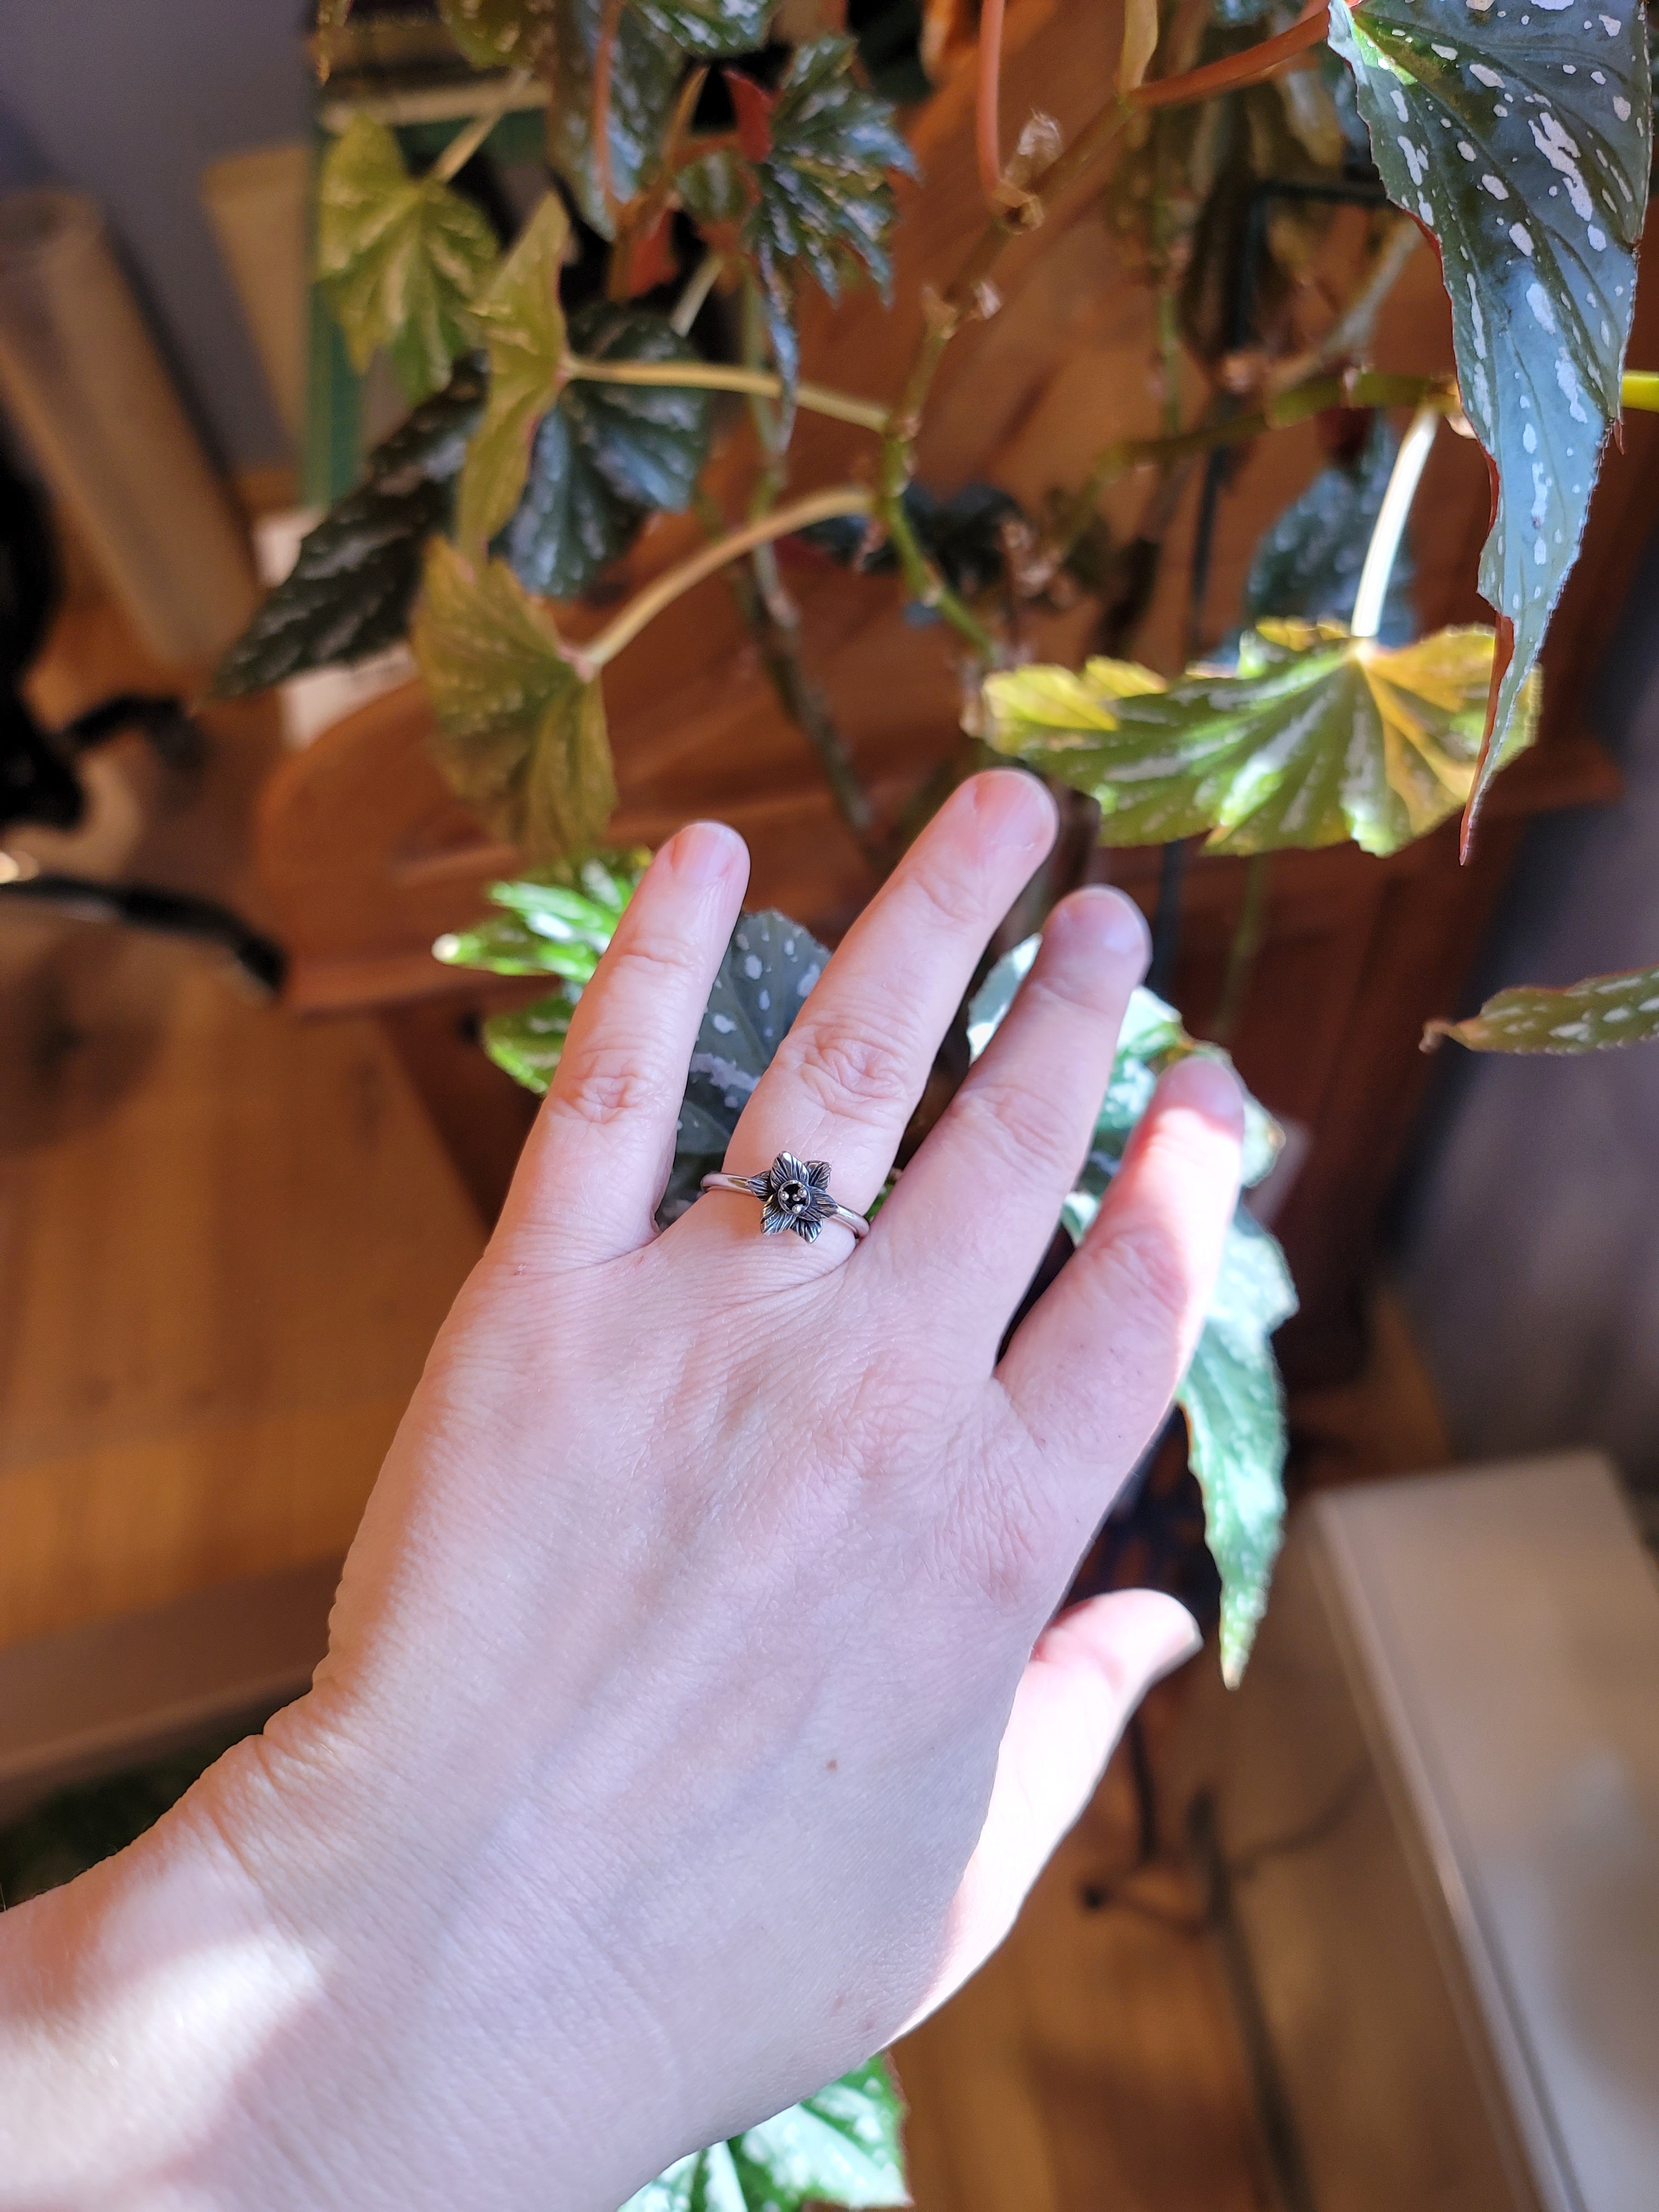 A hand is shown wearing the dainty silver daffodil ring. It is in front of a dark green begonia plant with some sunbeams coming in the back.